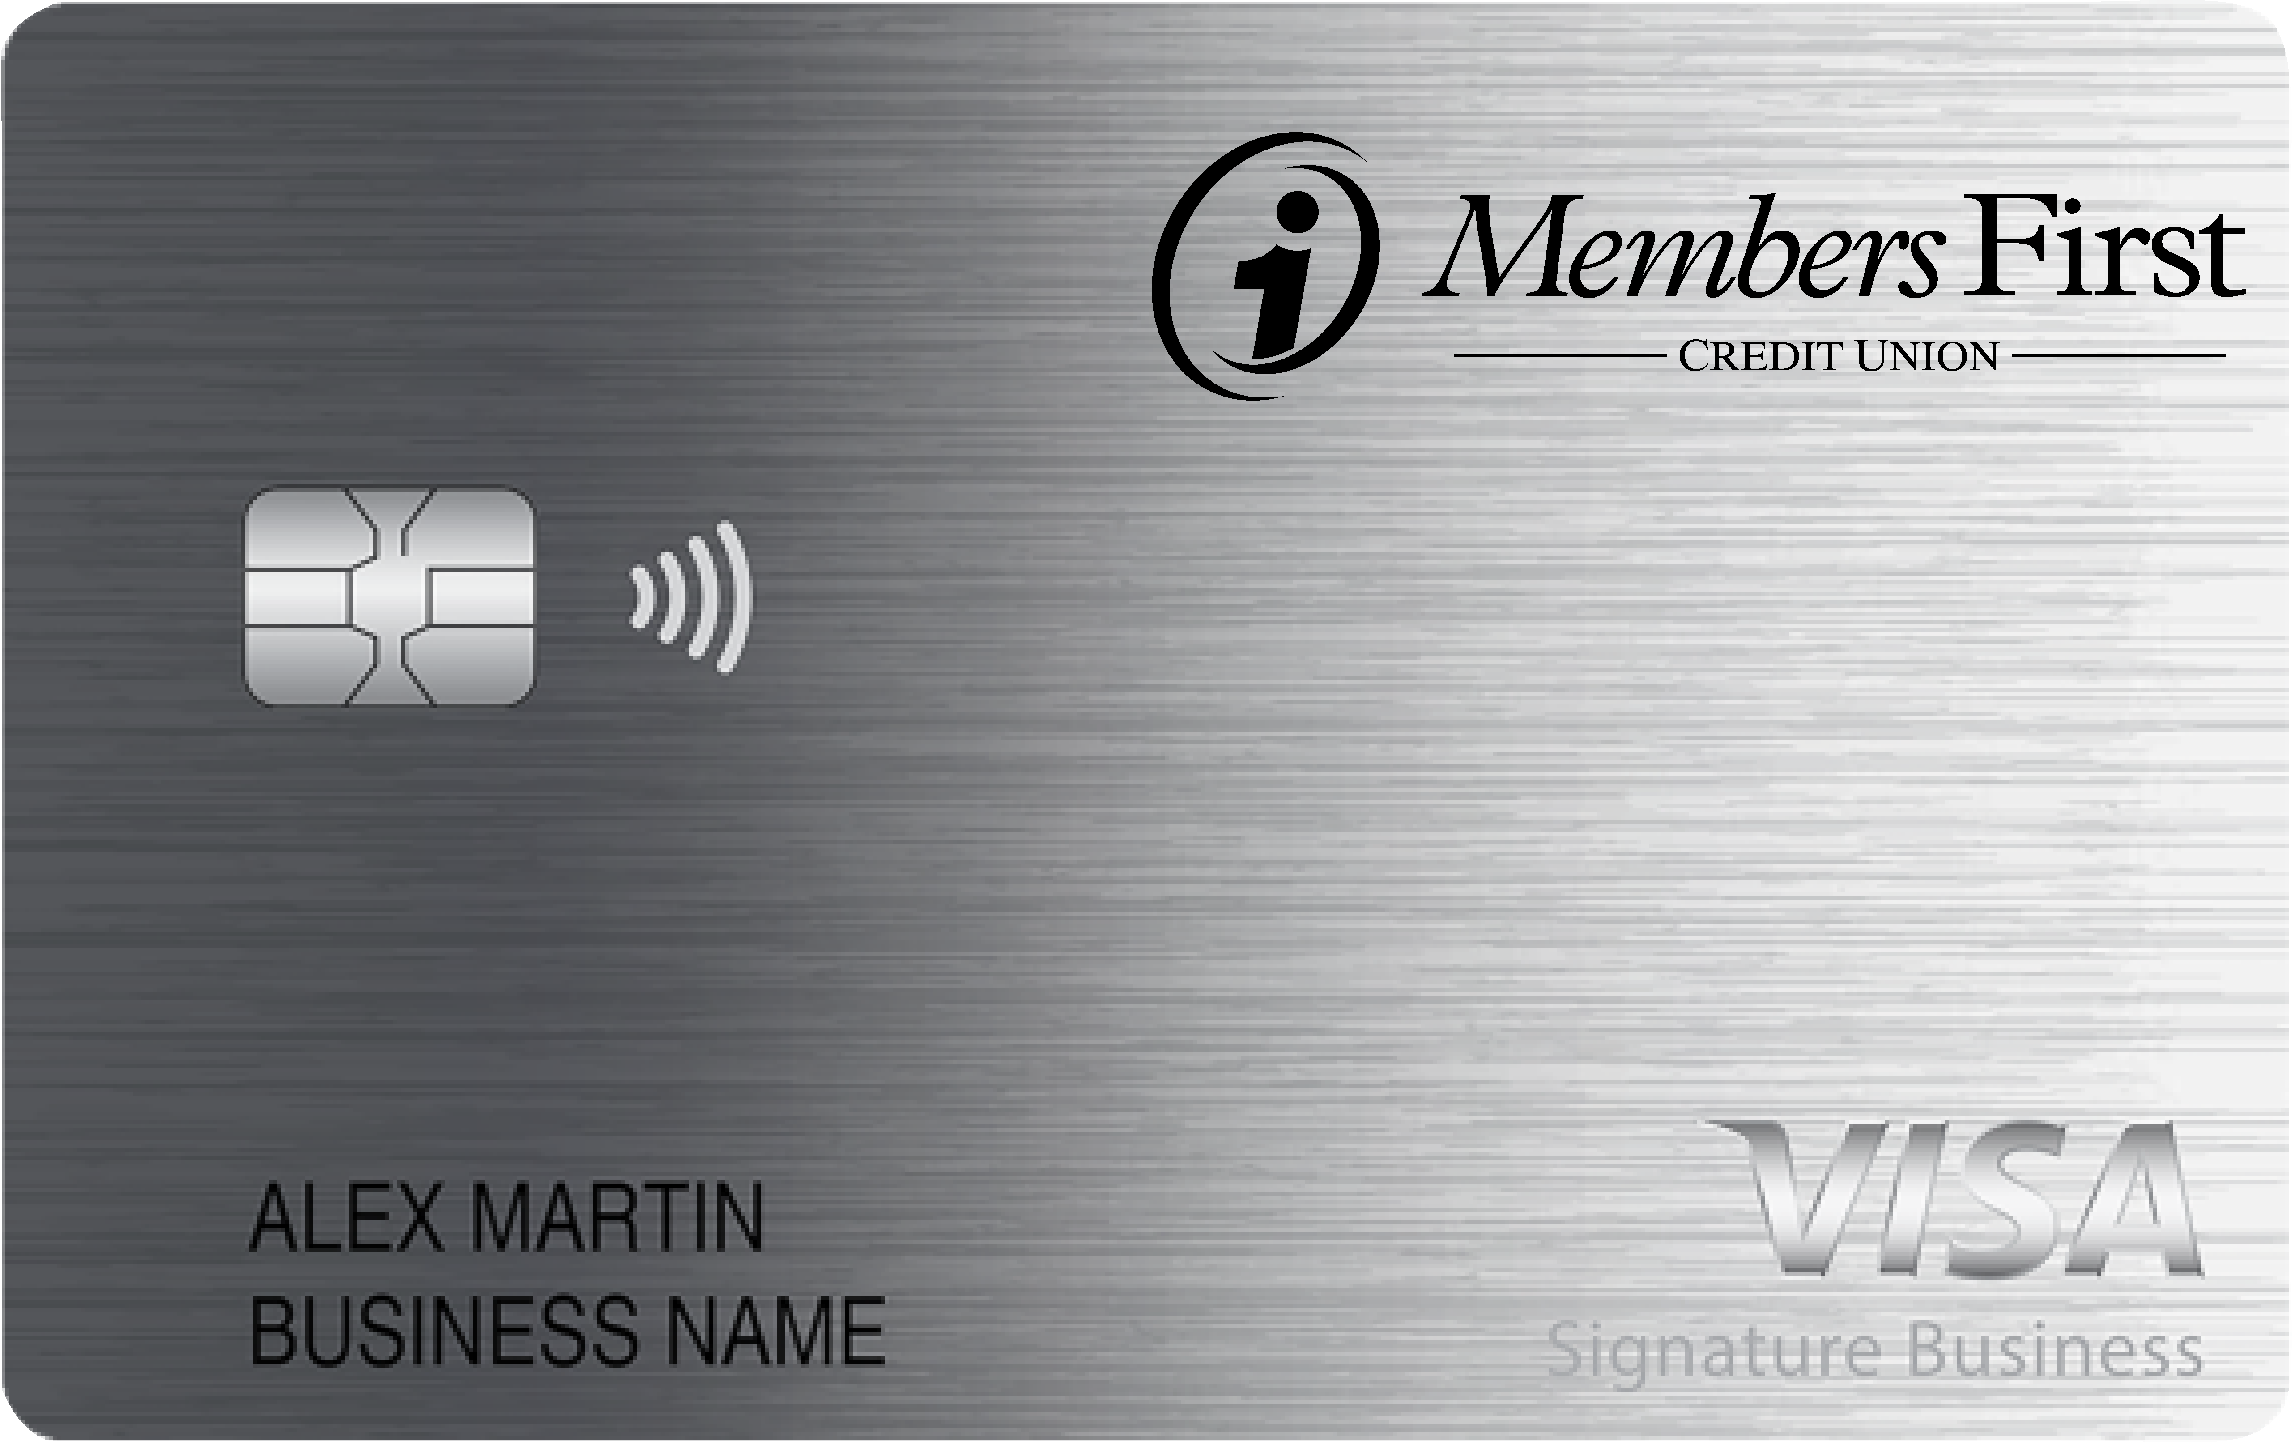 Members First Credit Union Smart Business Rewards Card